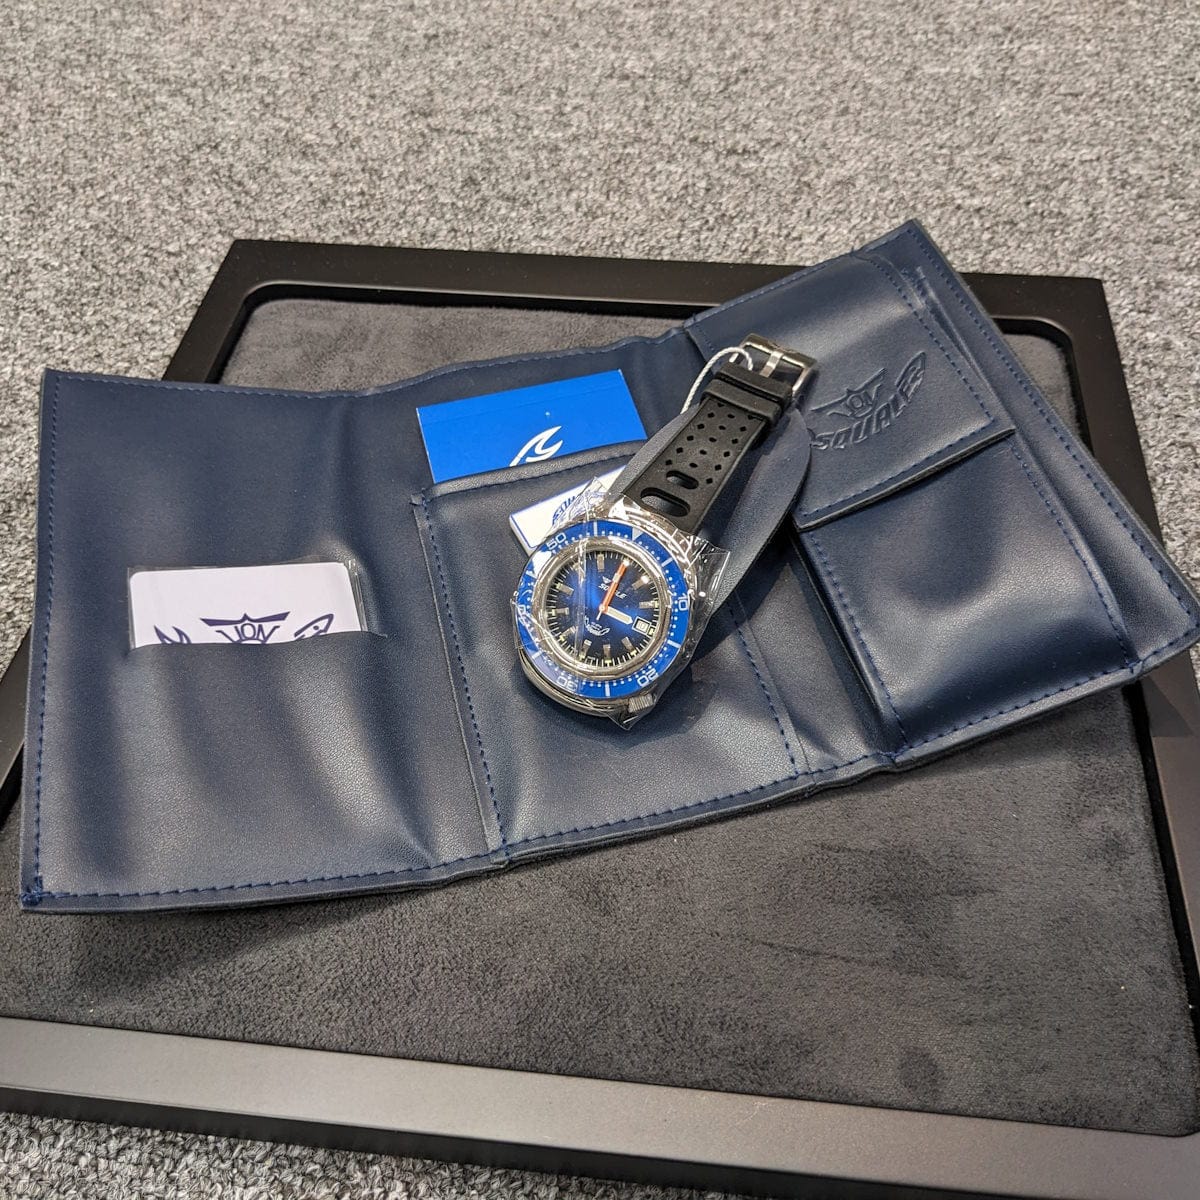 Squale 2002, Polished Case, Blue Sapphire Bezel, Blue Dial, Black Rubber - NEARLY NEW